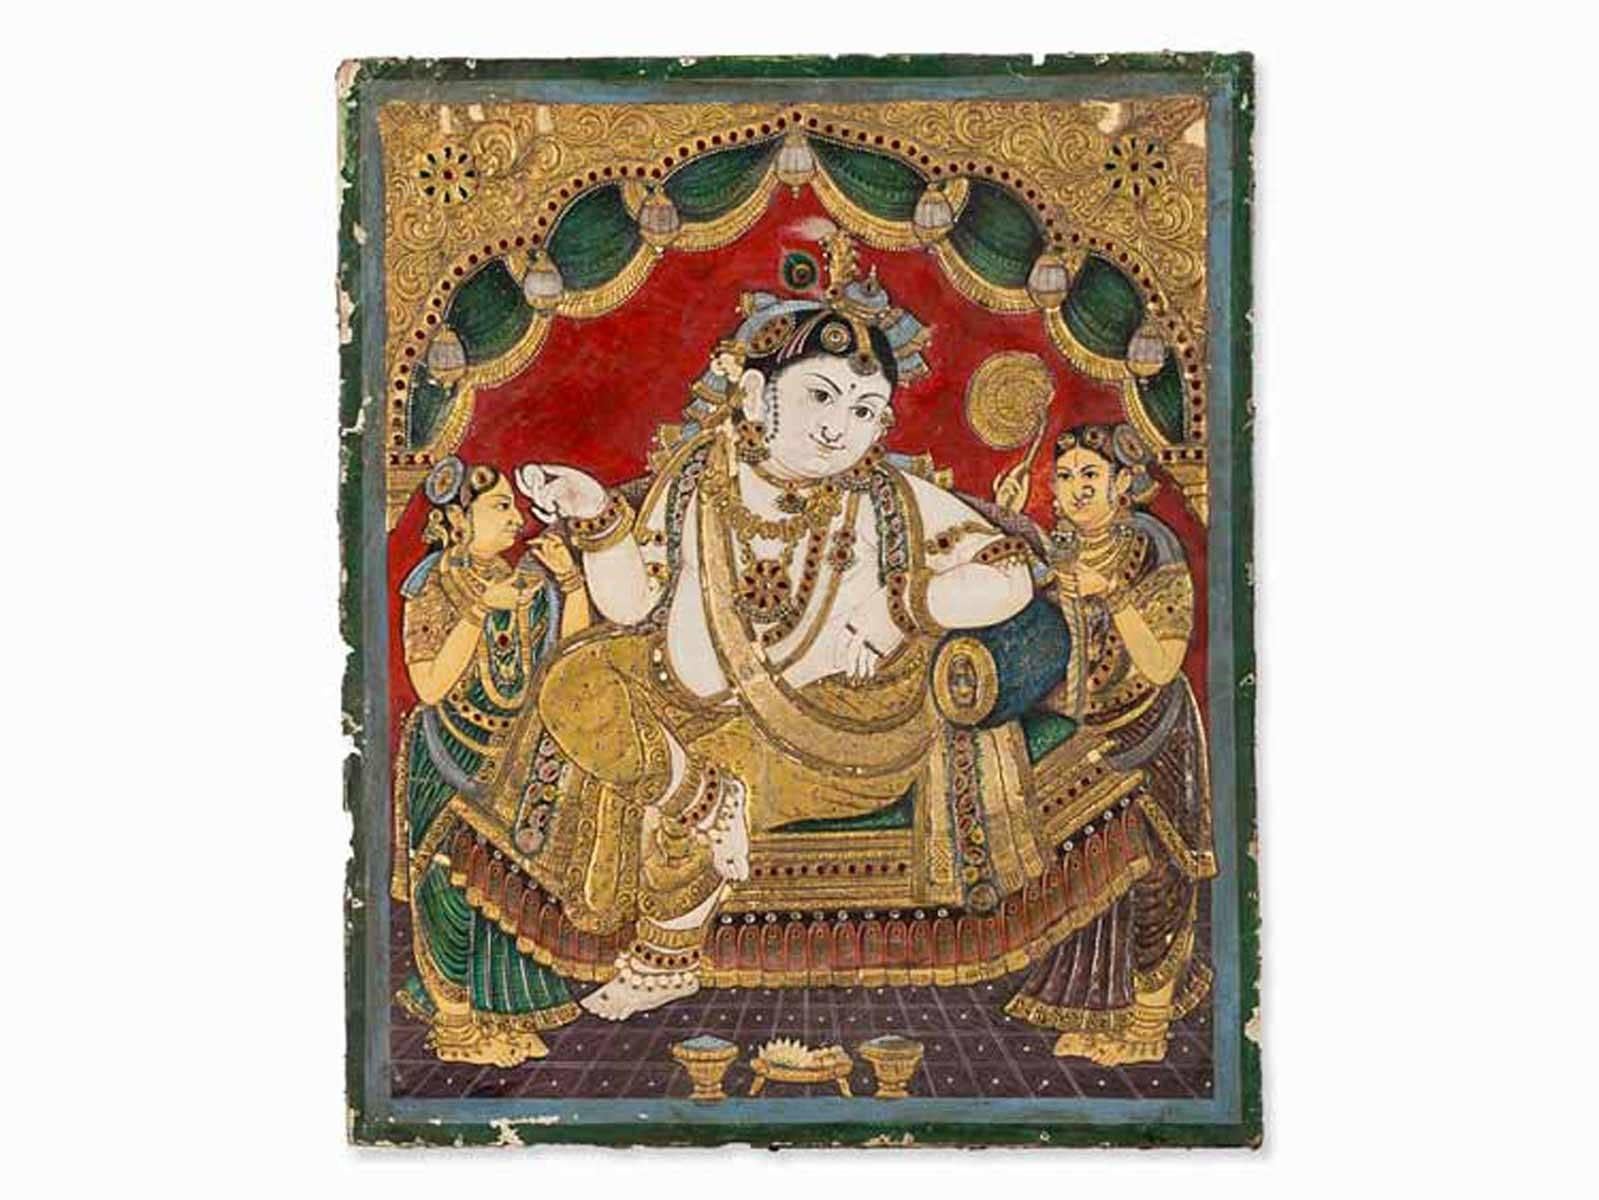 The work is in an overall good condition with signs of age and wear such as loss of color and material as well as missing inlays. The work depicted 
Krishna. He is worshipped as the eighth avatar of Vishnu and recognized as the Supreme Being. He